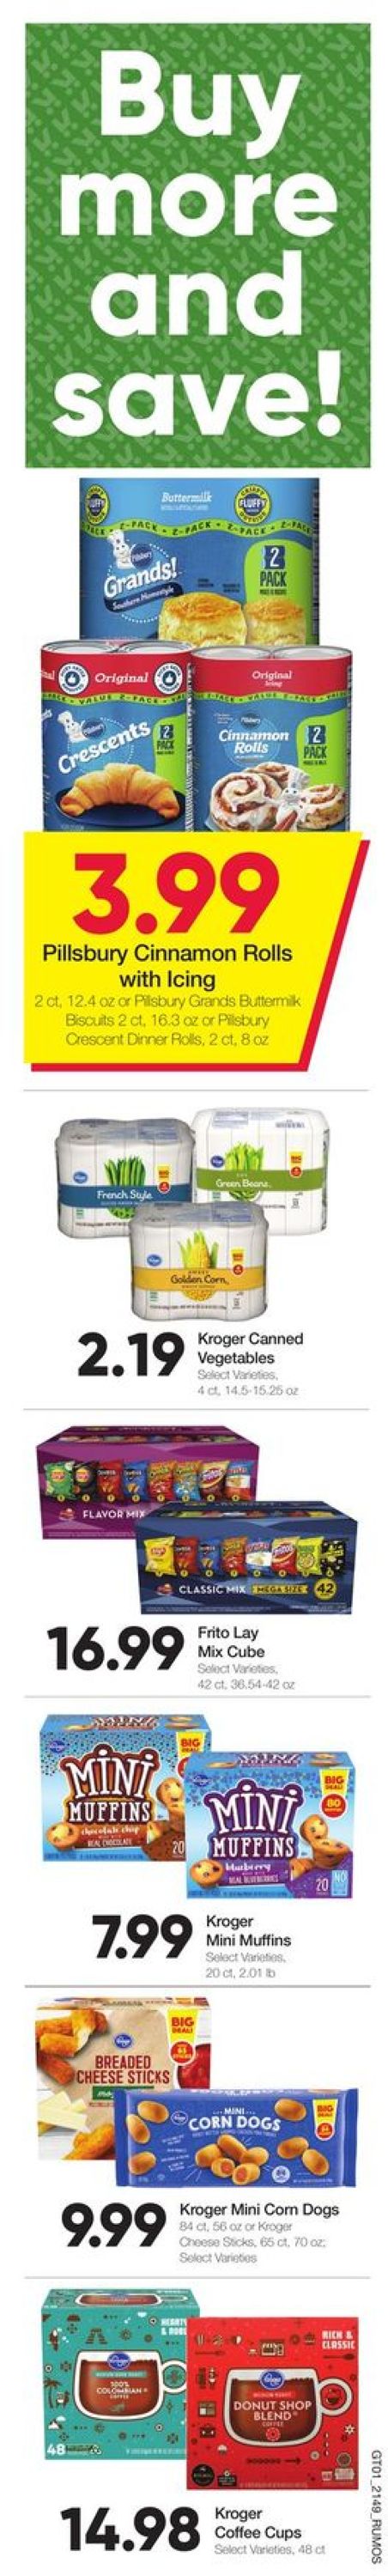 Catalogue Ruler Foods from 01/05/2022